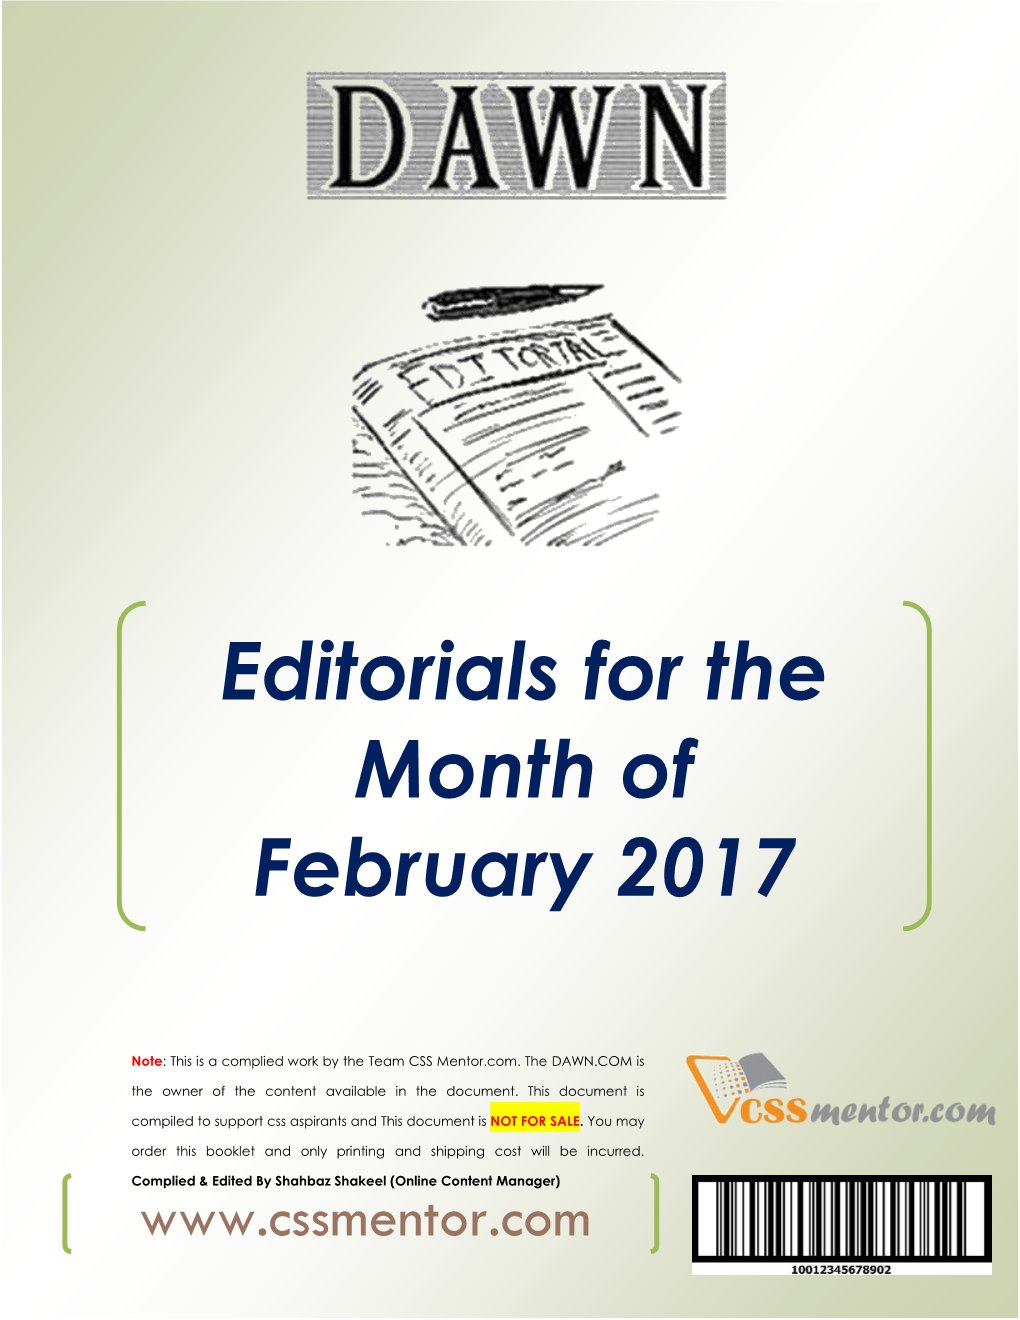 Editorials for the Month of February 2017